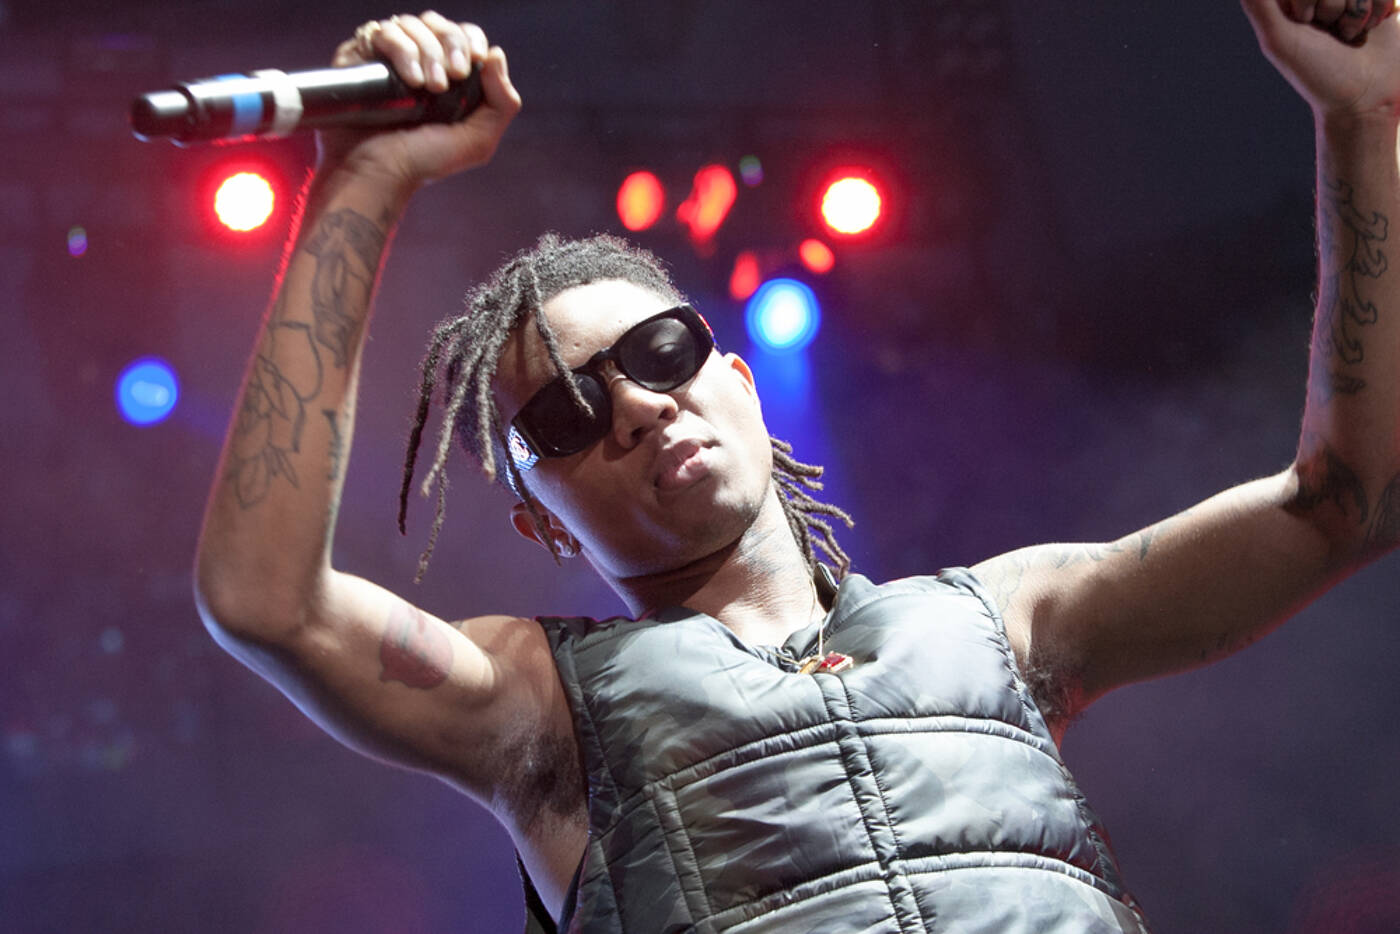 Blockchain-Based Metaverse Game Appoints Rapper Swae Lee as CEO